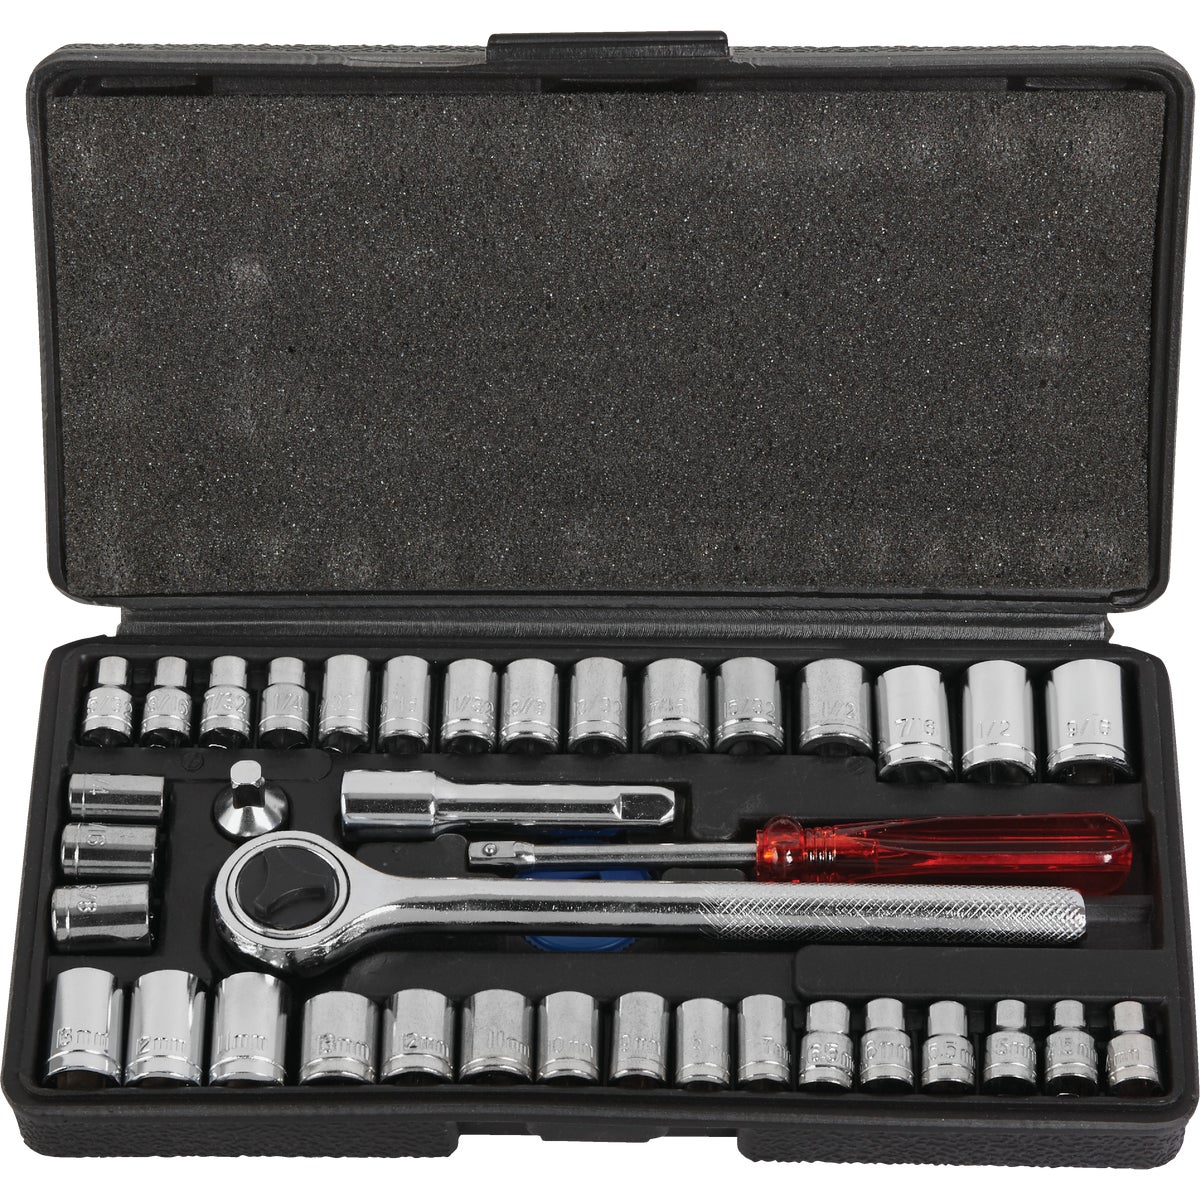 Do it Standard/Metric 1/4 In. and 3/8 In. Drive Combination Ratchet & Socket Set (40-Piece)